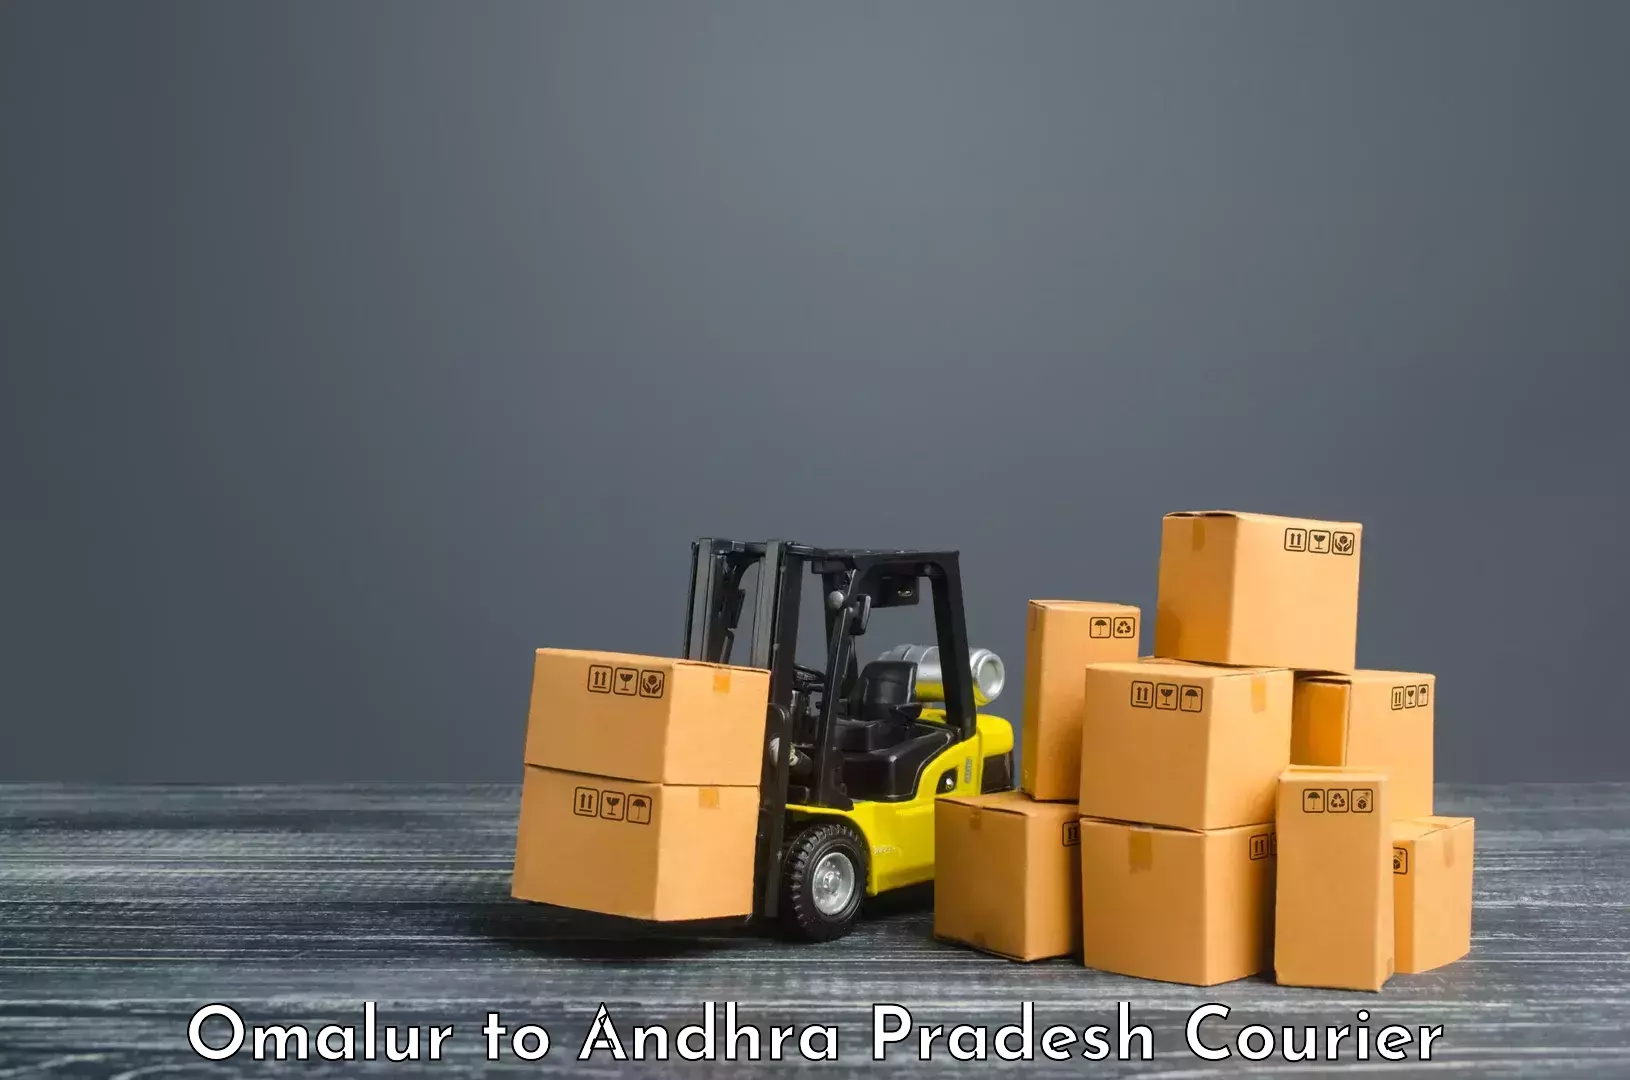 Express logistics service in Omalur to Anantapur